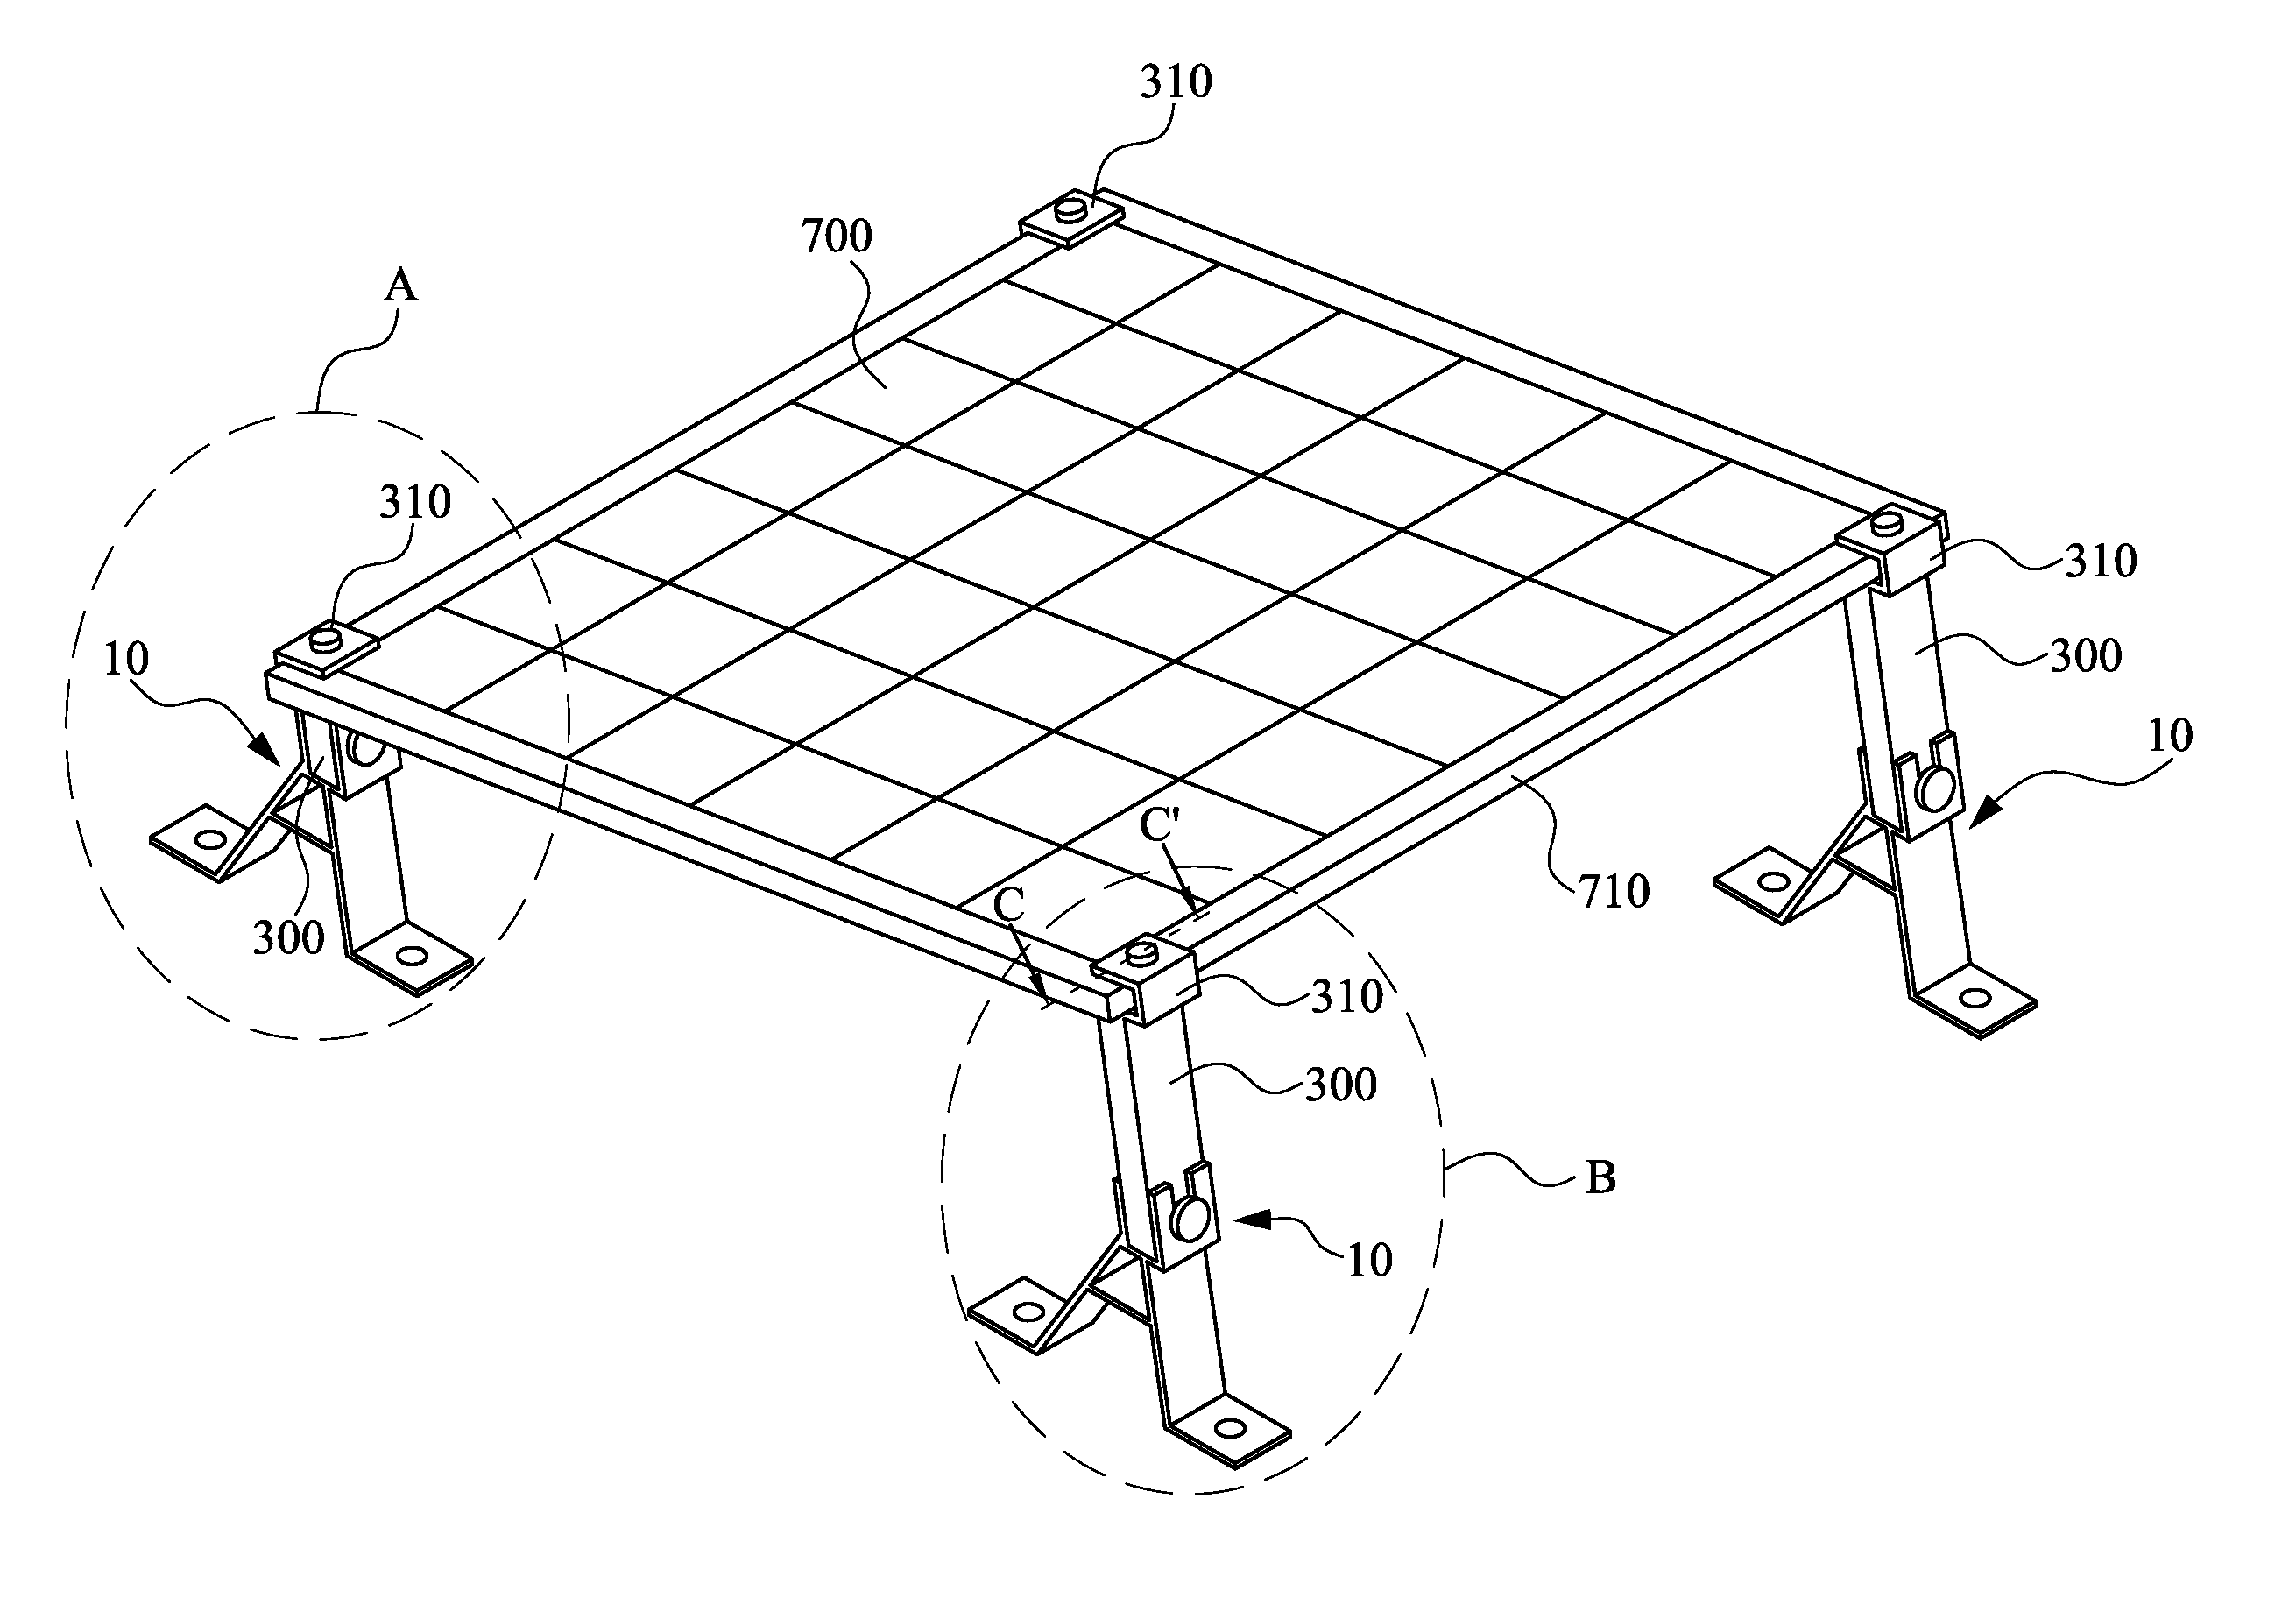 Photovoltaic panel system, photovoltaic panel fastening device, and method of installing photovoltaic panel system